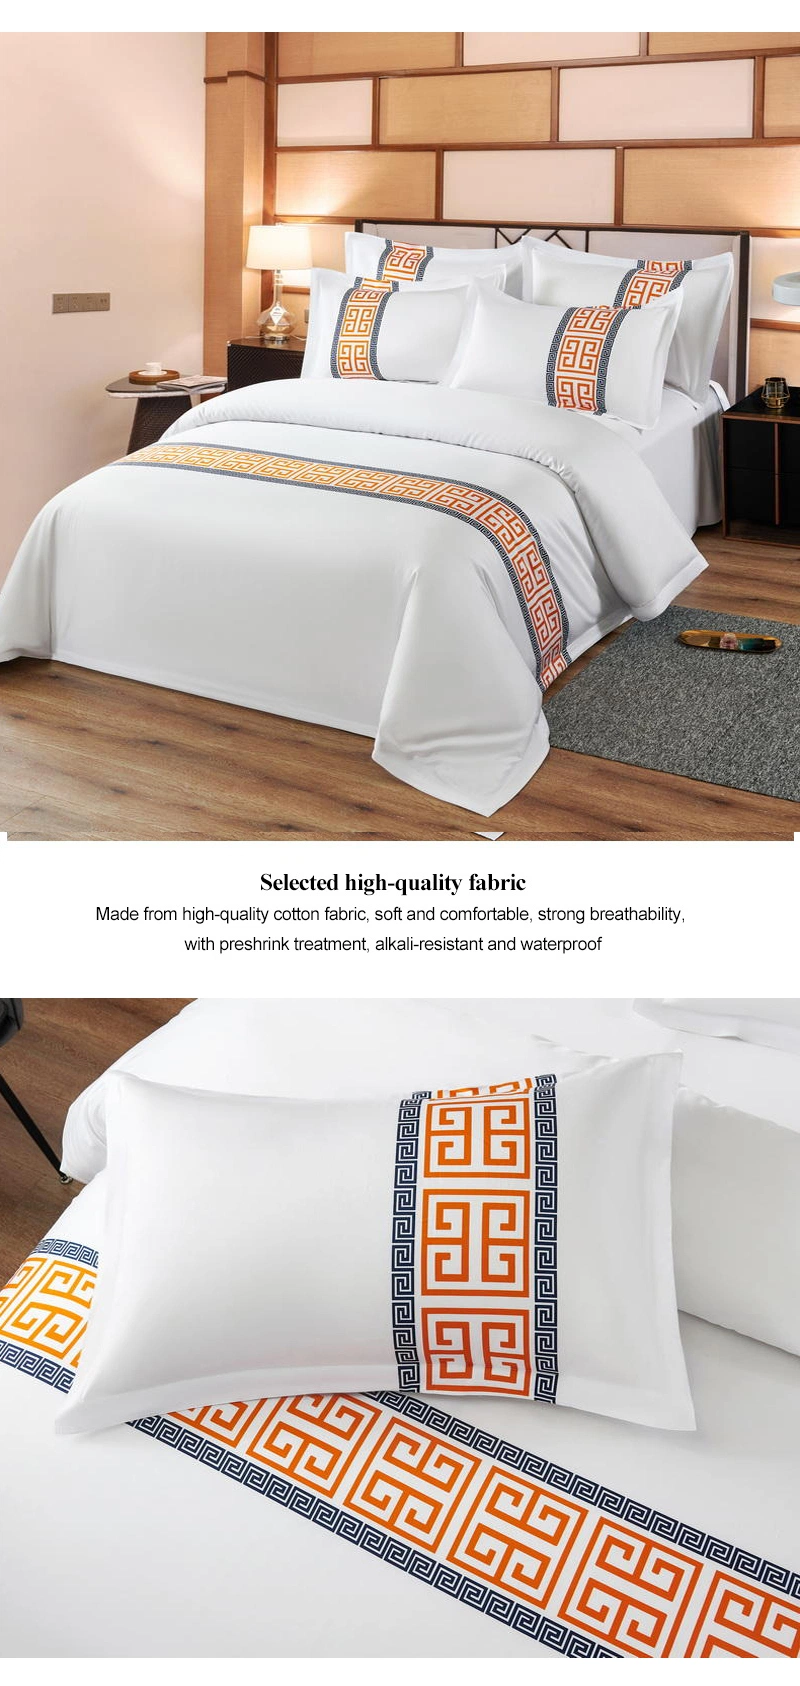 Factory Bed Linen Wholesale 100% Cotton Motel Linen, Bedclothes King Size Sheets for Hotel